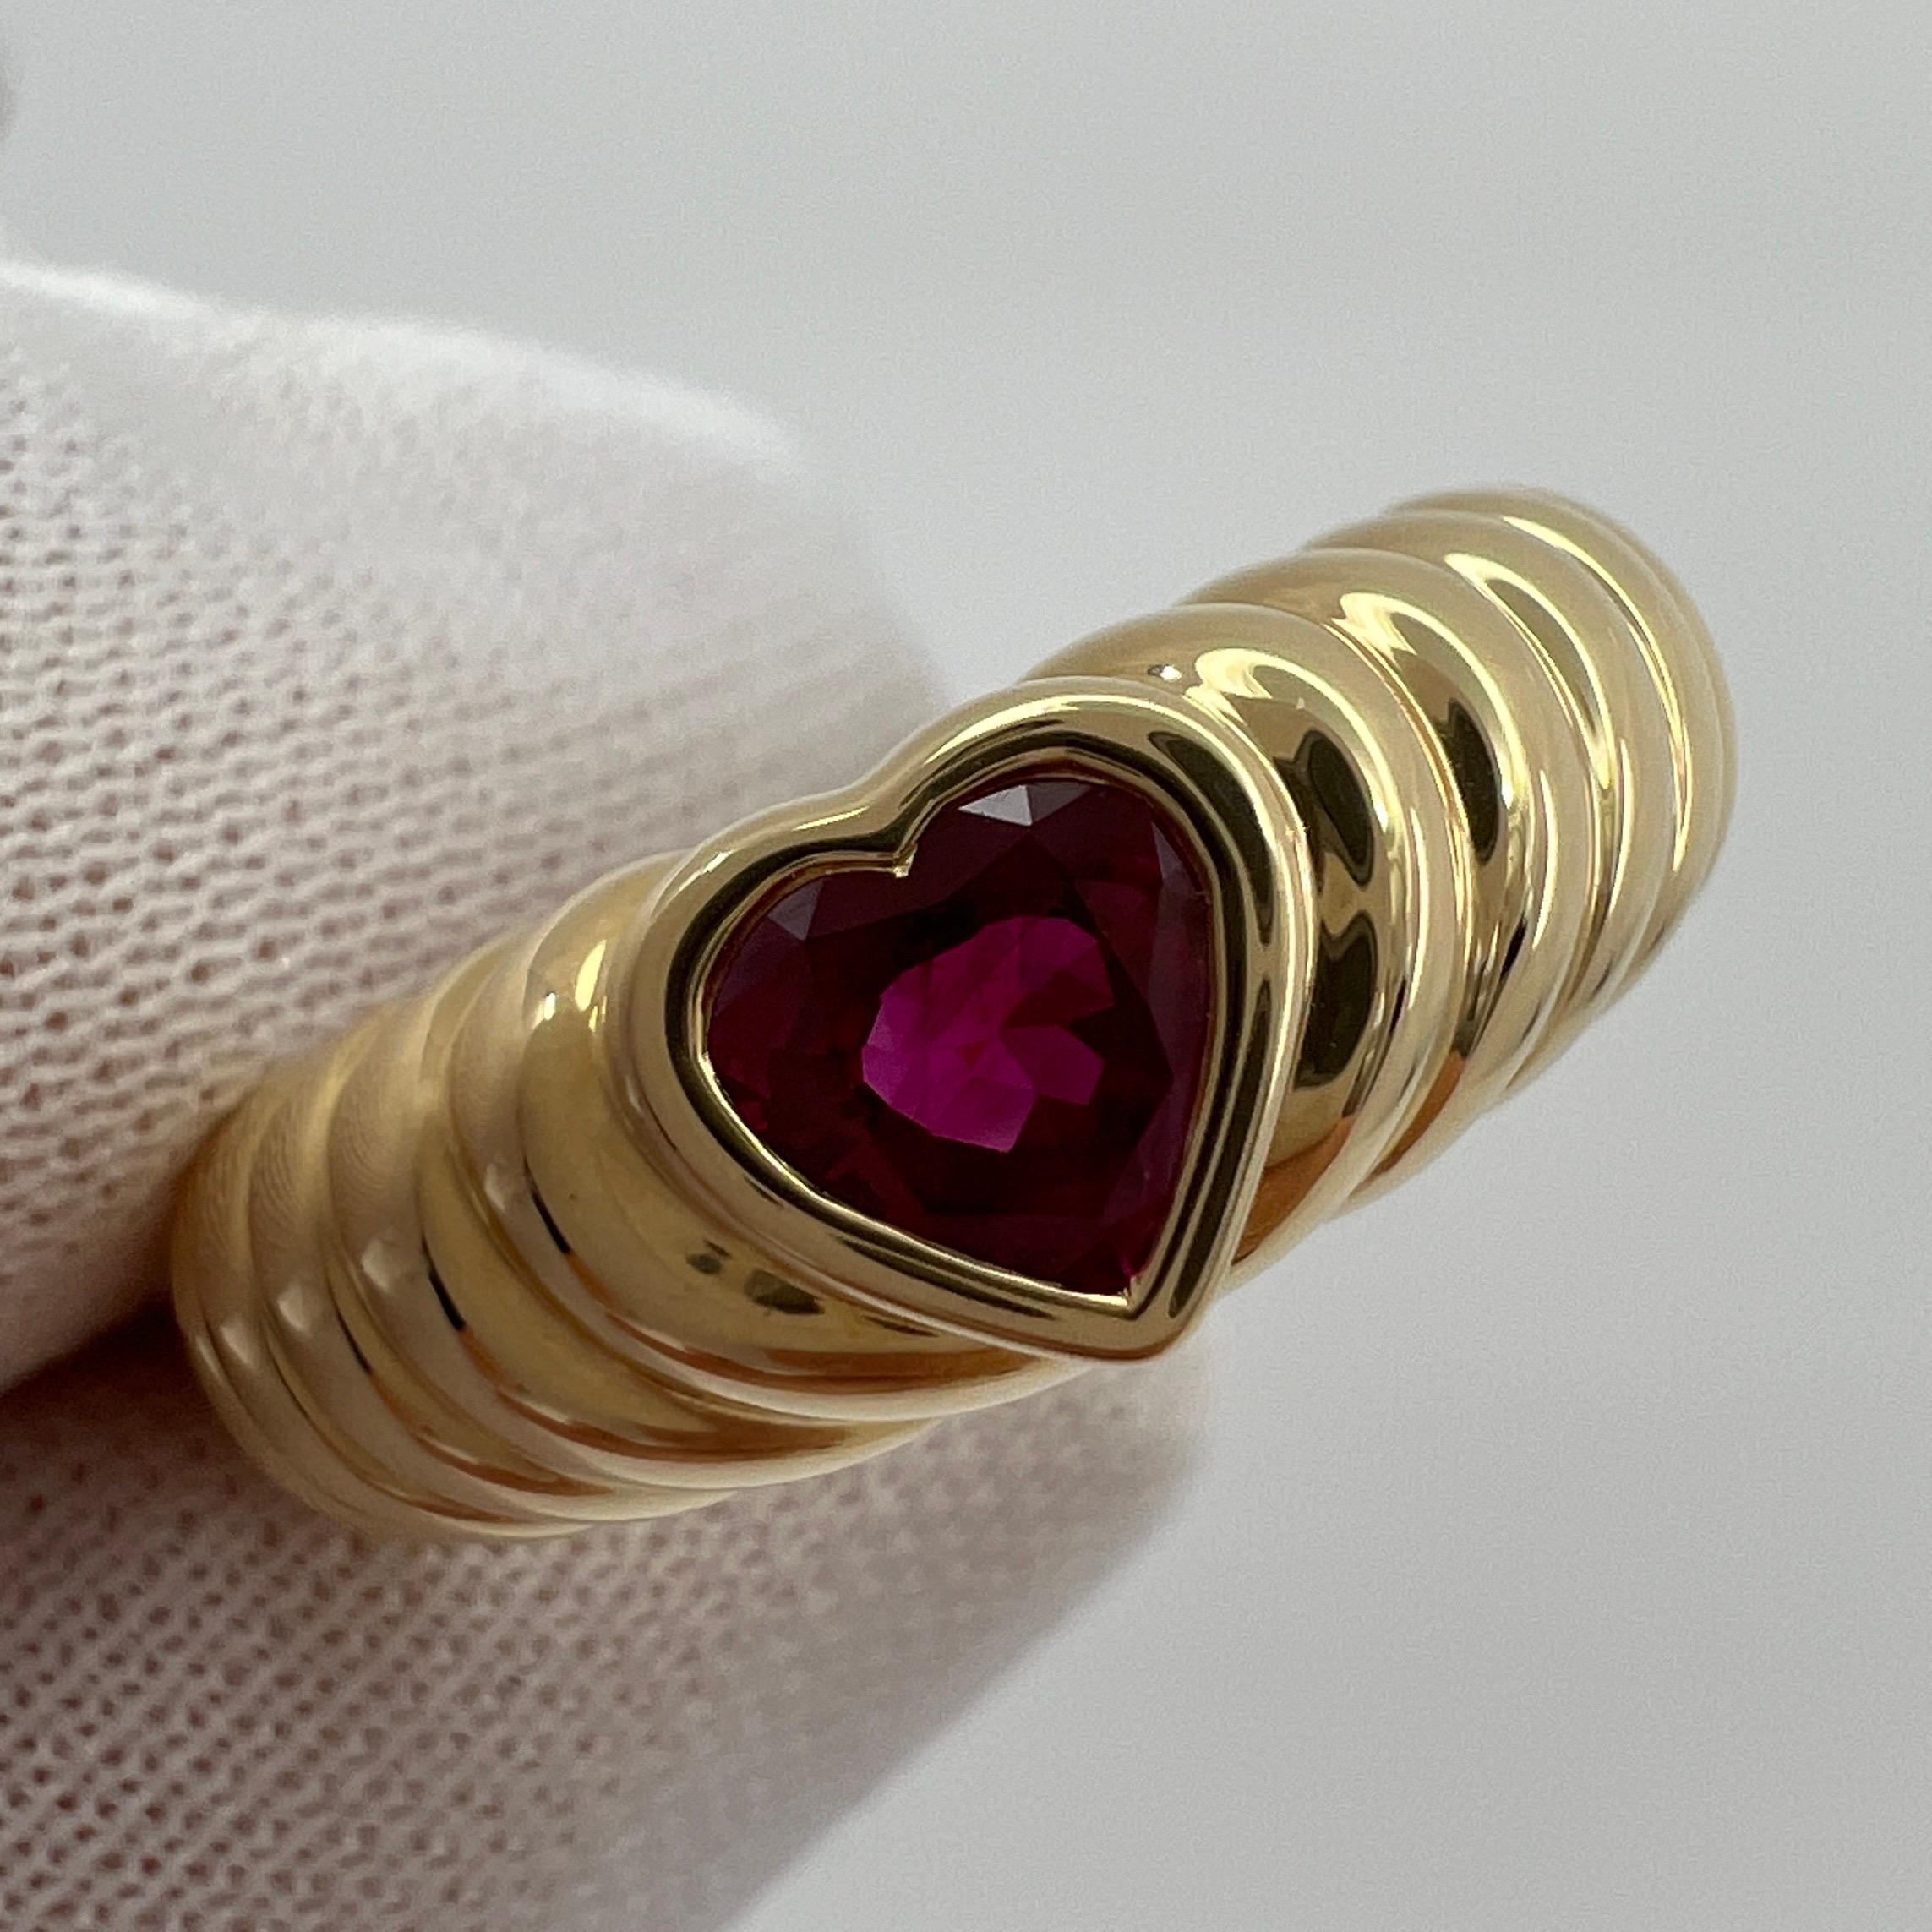 Rare Tiffany & Co. Vivid Blood Red Ruby Heart Cut 18k Yellow Gold Band Ring.

A beautifully made yellow gold ring set with a stunning vivid blood red heart cut ruby. Superb colour, clarity and cut. Approx. 0.80 carat in weight, a fine top grade